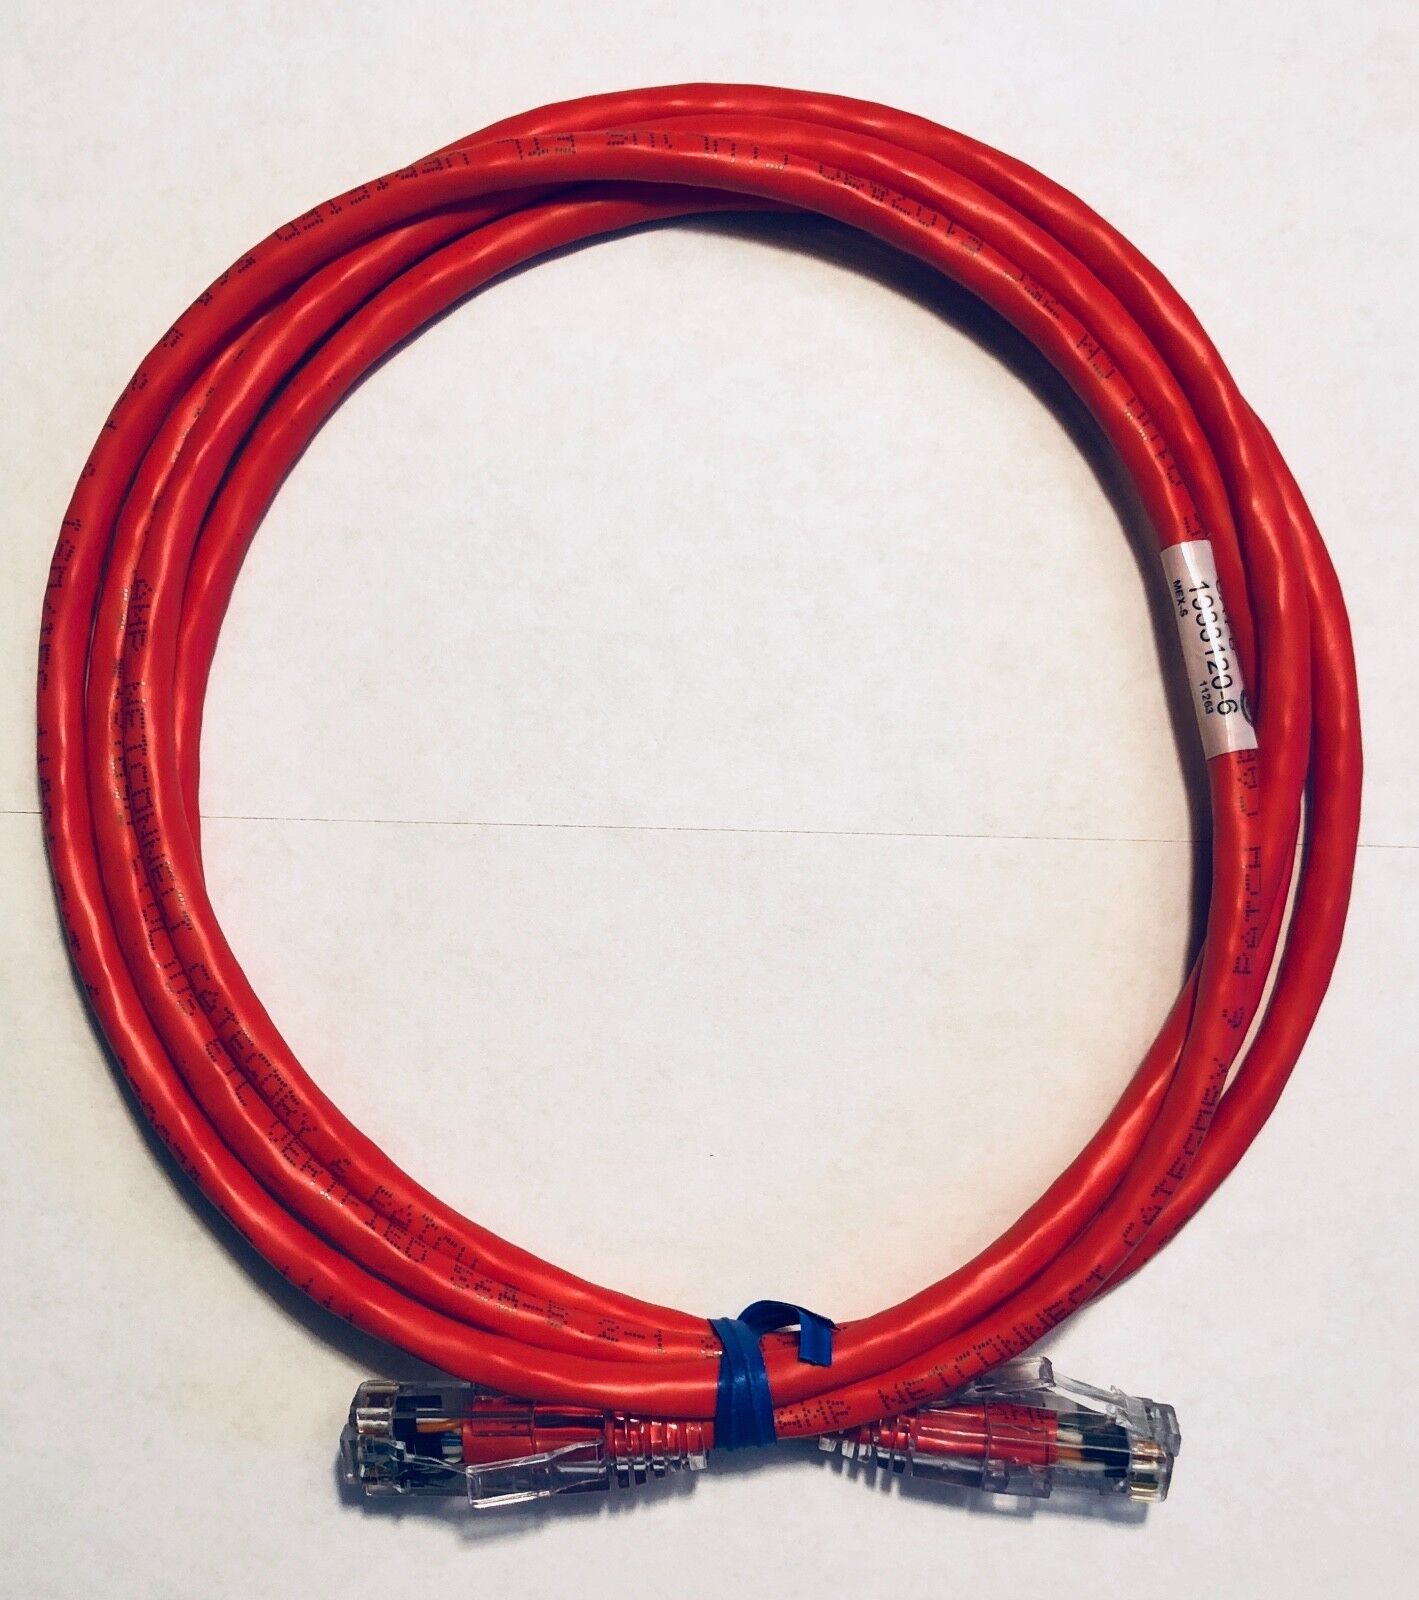 TE AMP CommScope 6ft CAT 6 Slimline Patch Cable Red 